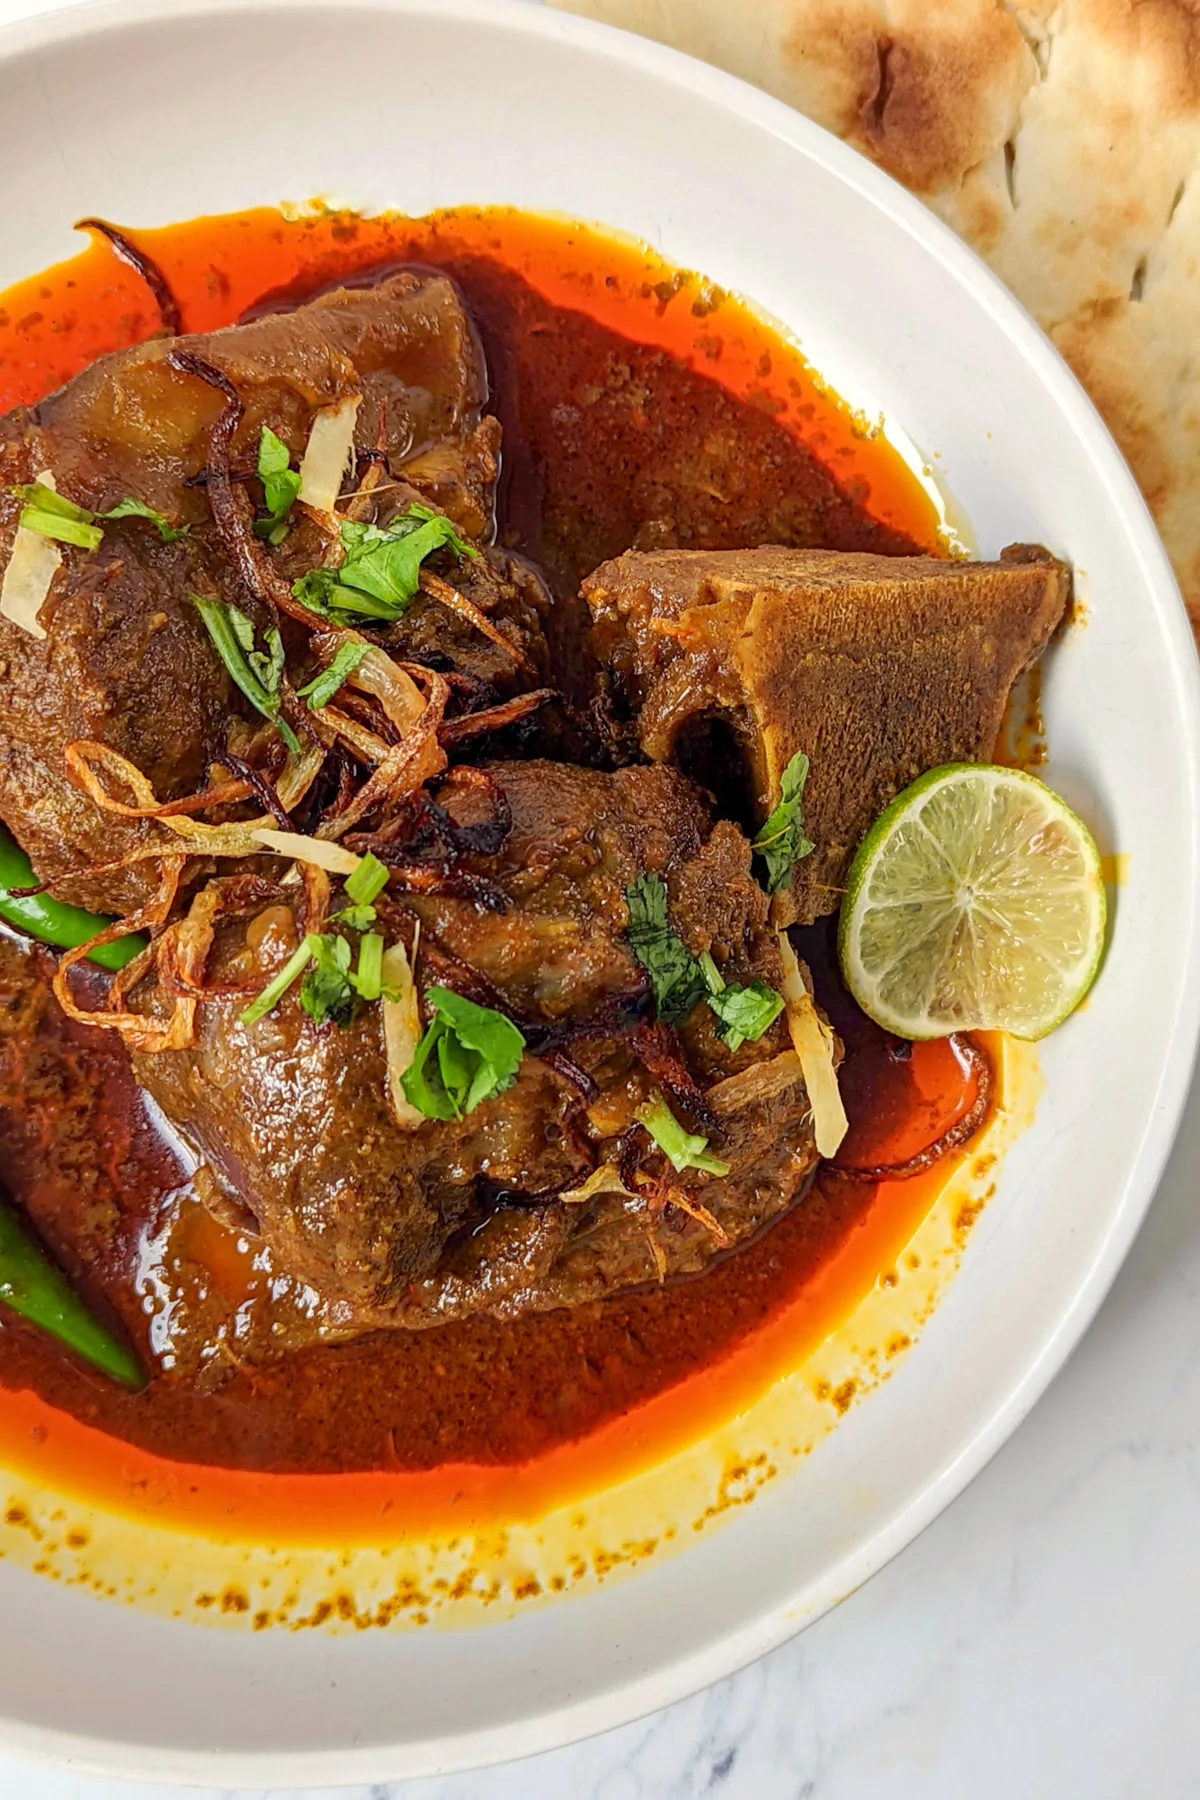 Nihari on a plate with naan.